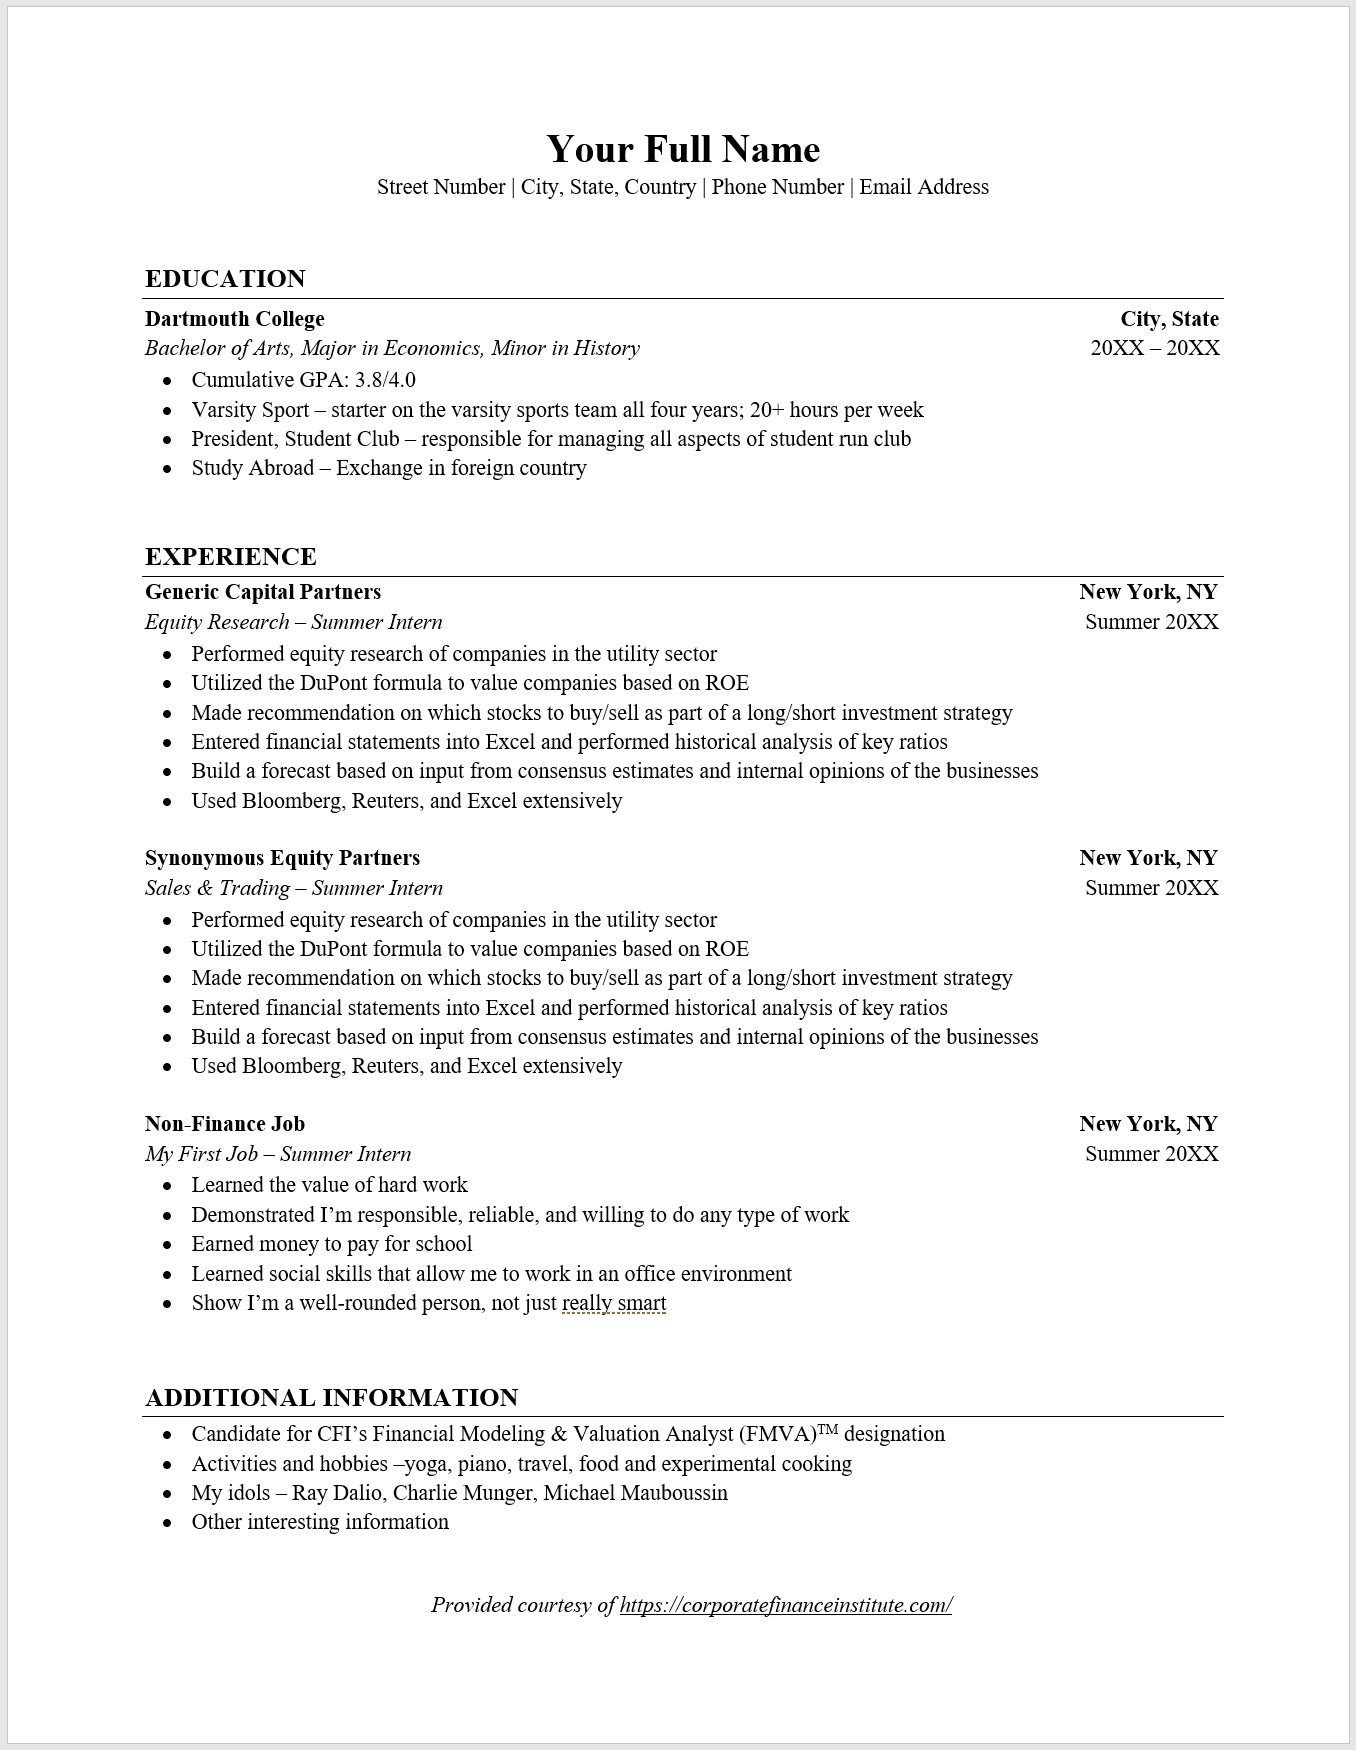 How To Do A Resume Investment Banking Resume Template Example how to do a resume|wikiresume.com